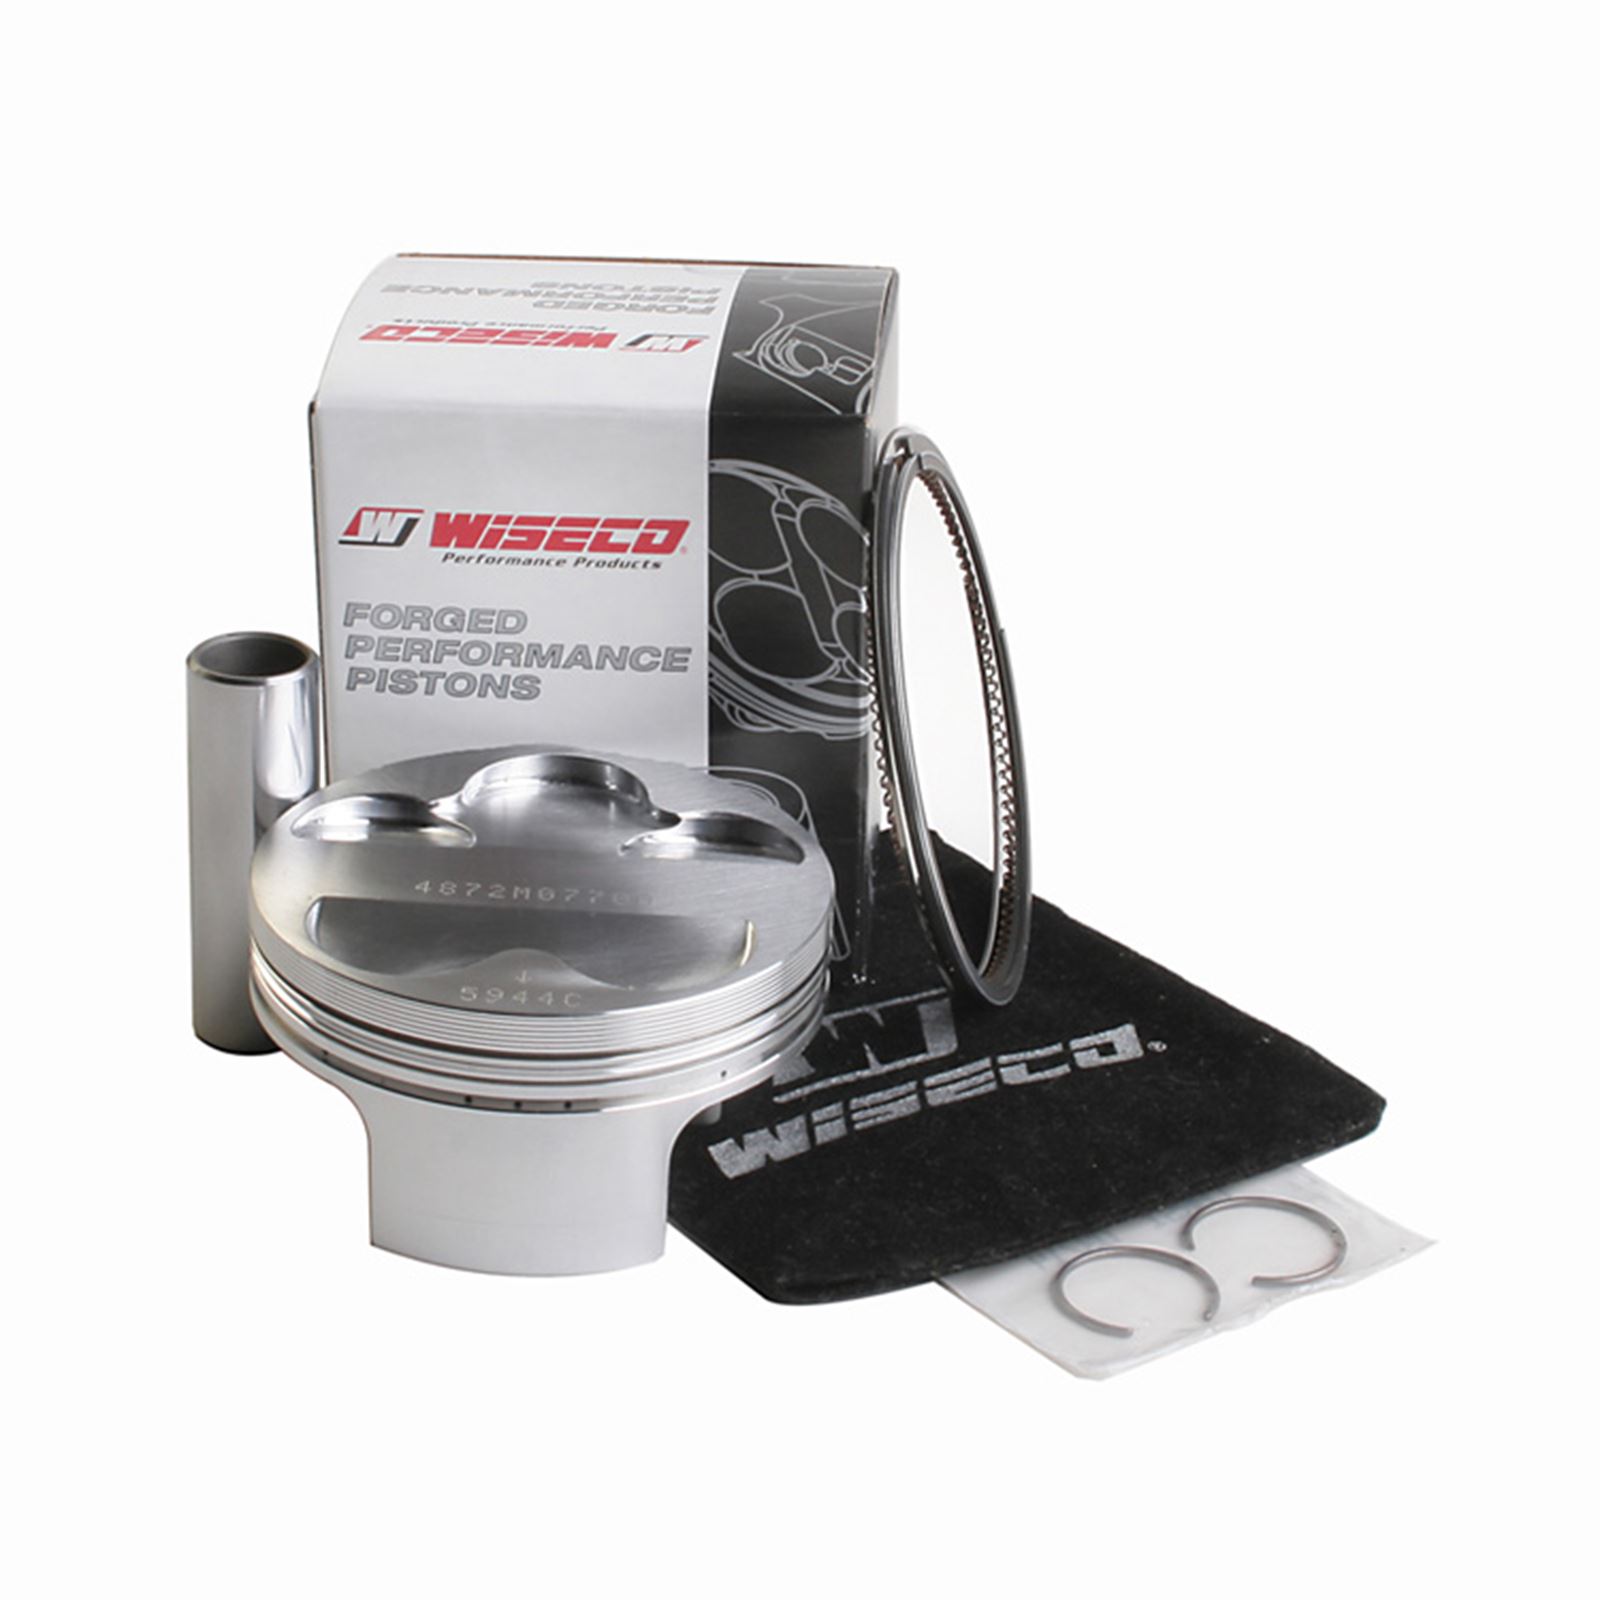 Wiseco 4982M08300 Piston Kit For 2003 Yamaha WR250F